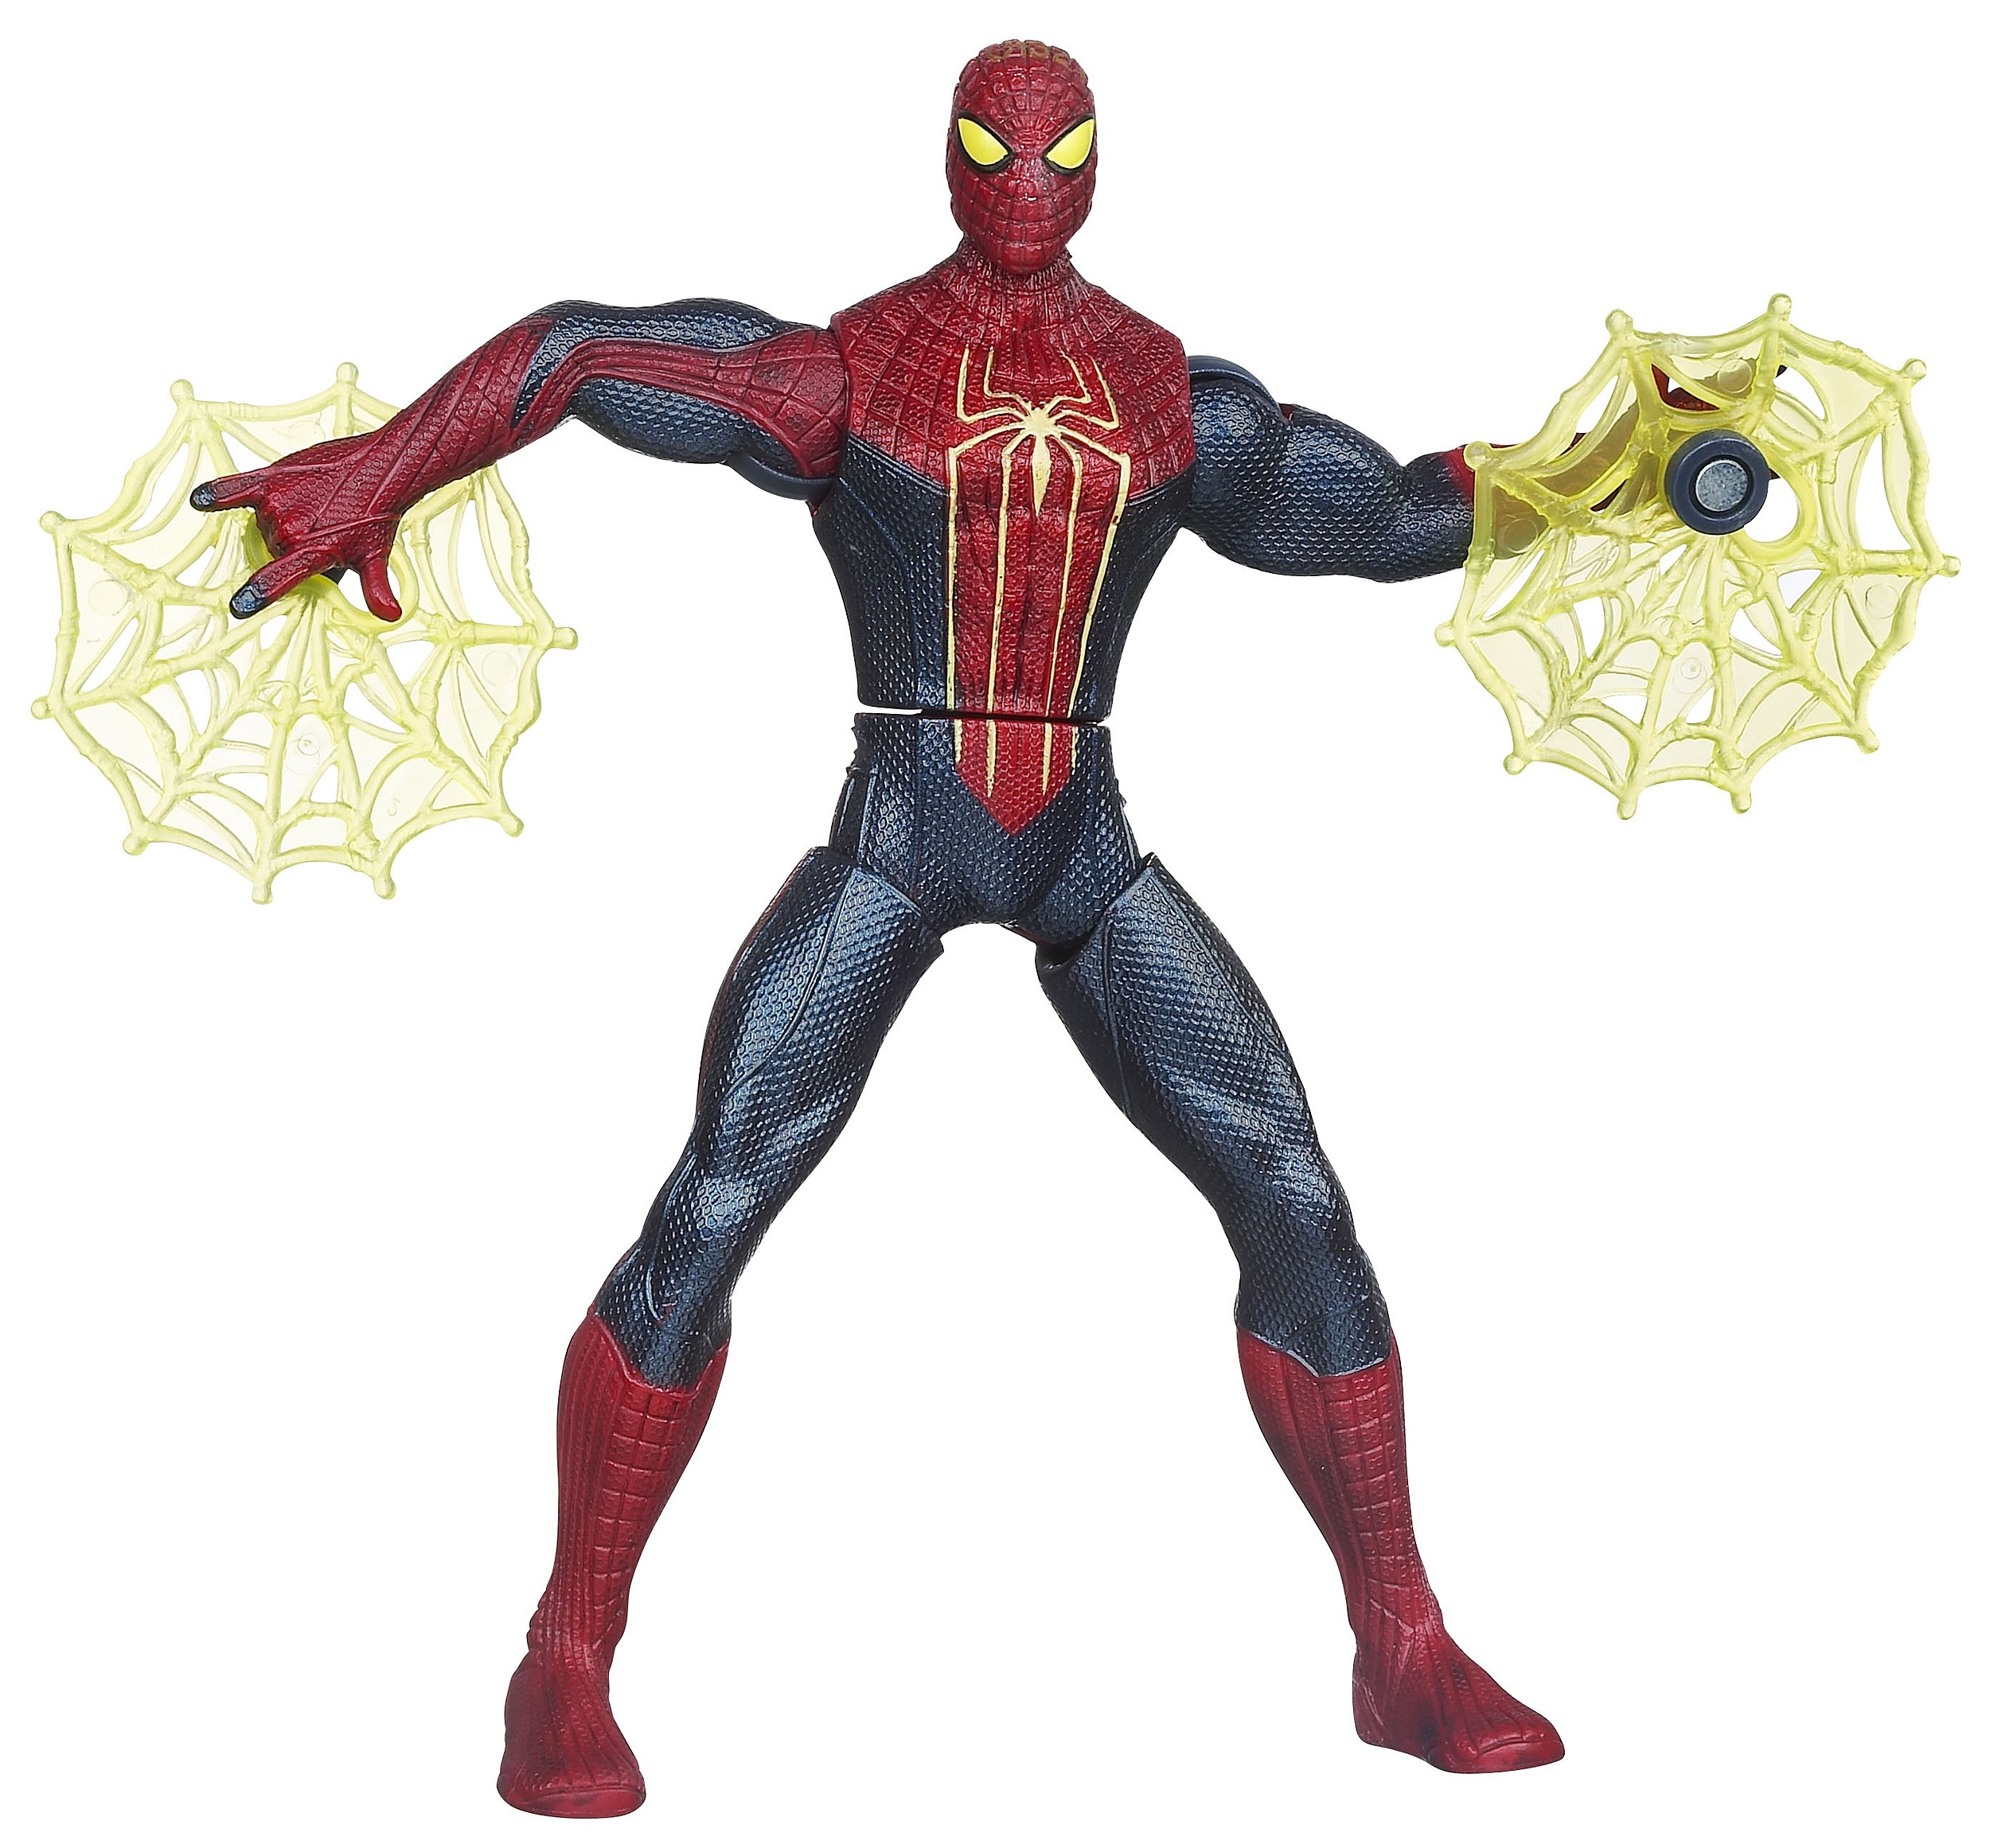 The Amazing Spider-Man' Movie Toy Images Arrive [Toy Fair 2012]